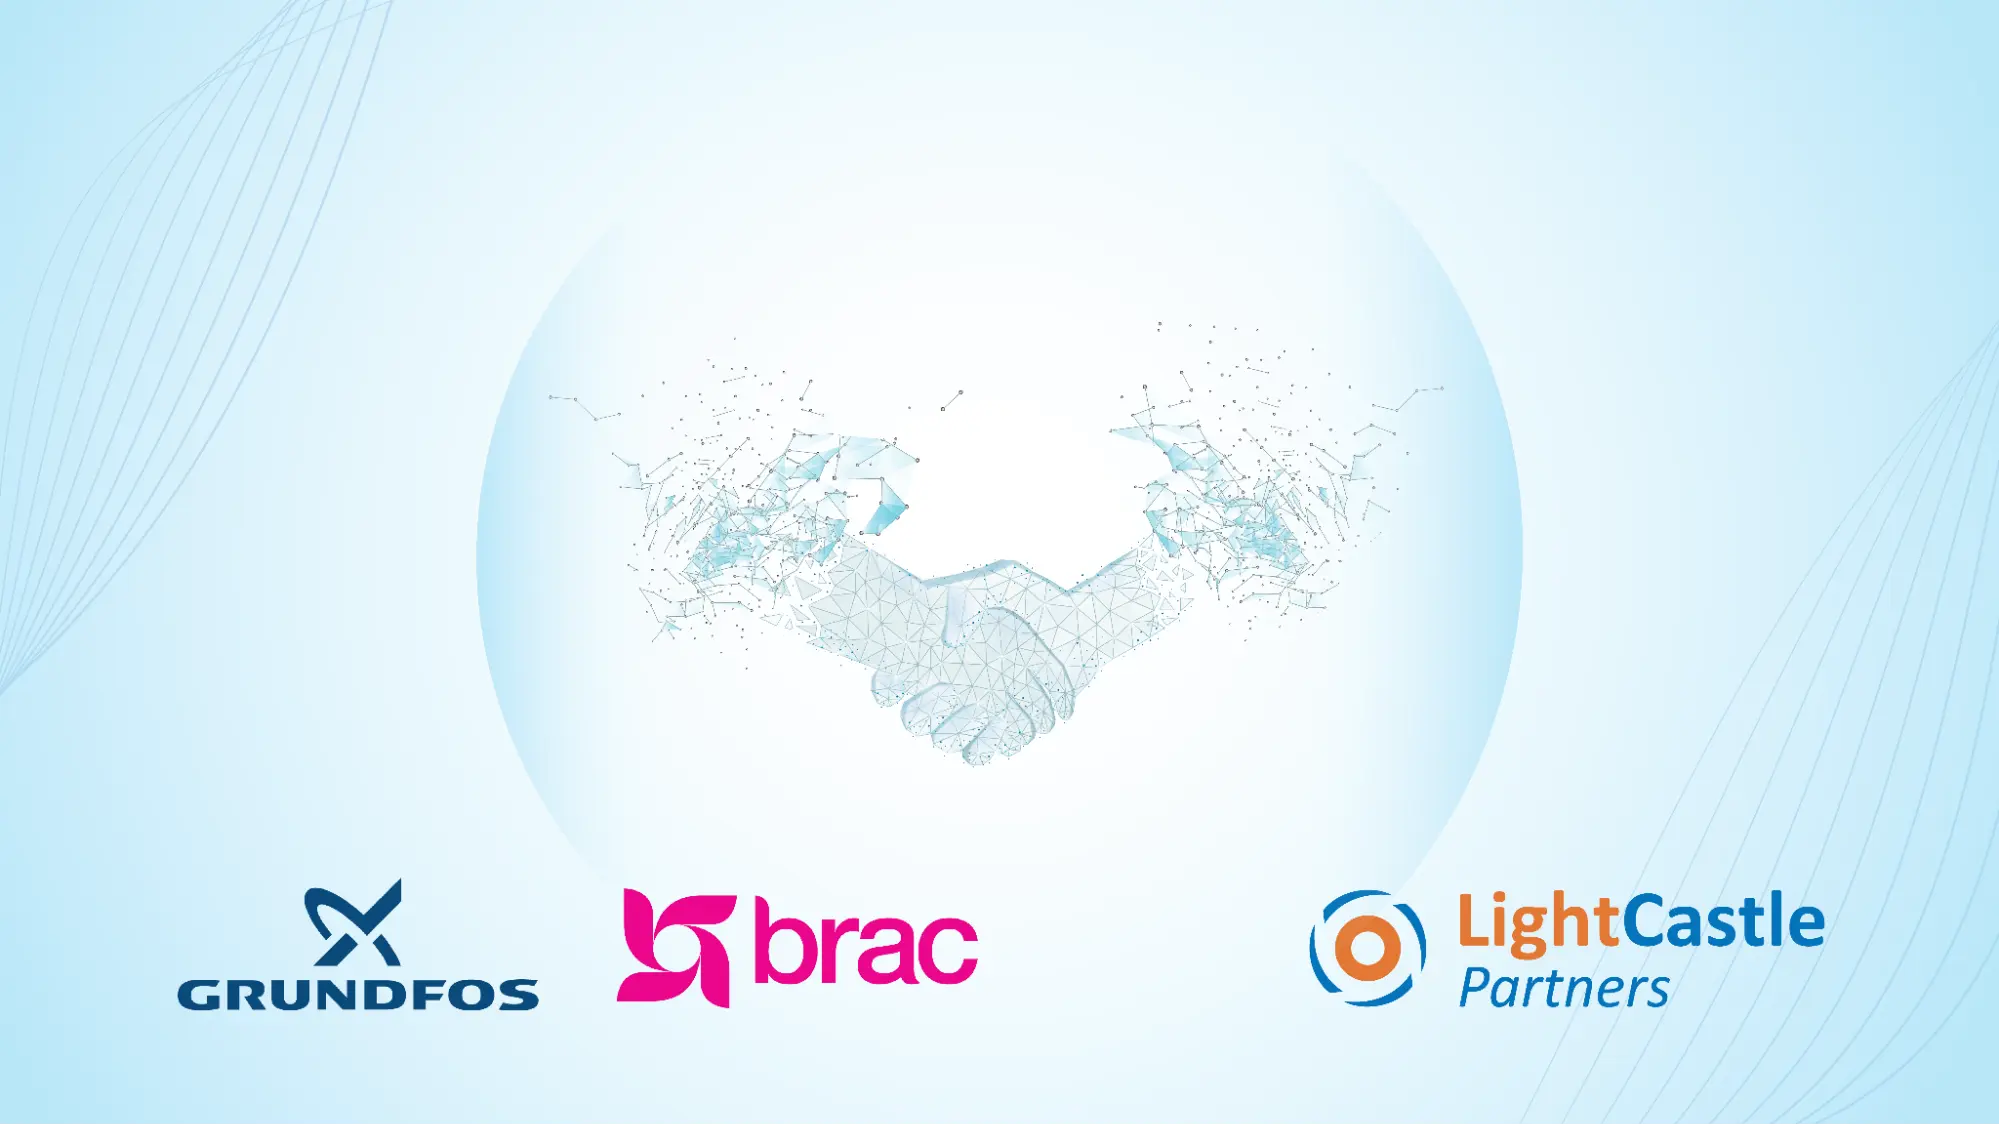 LightCastle Partners, Grundfos and BRAC UK Join Hands to Promote Access to Clean Drinking Water in Bangladesh